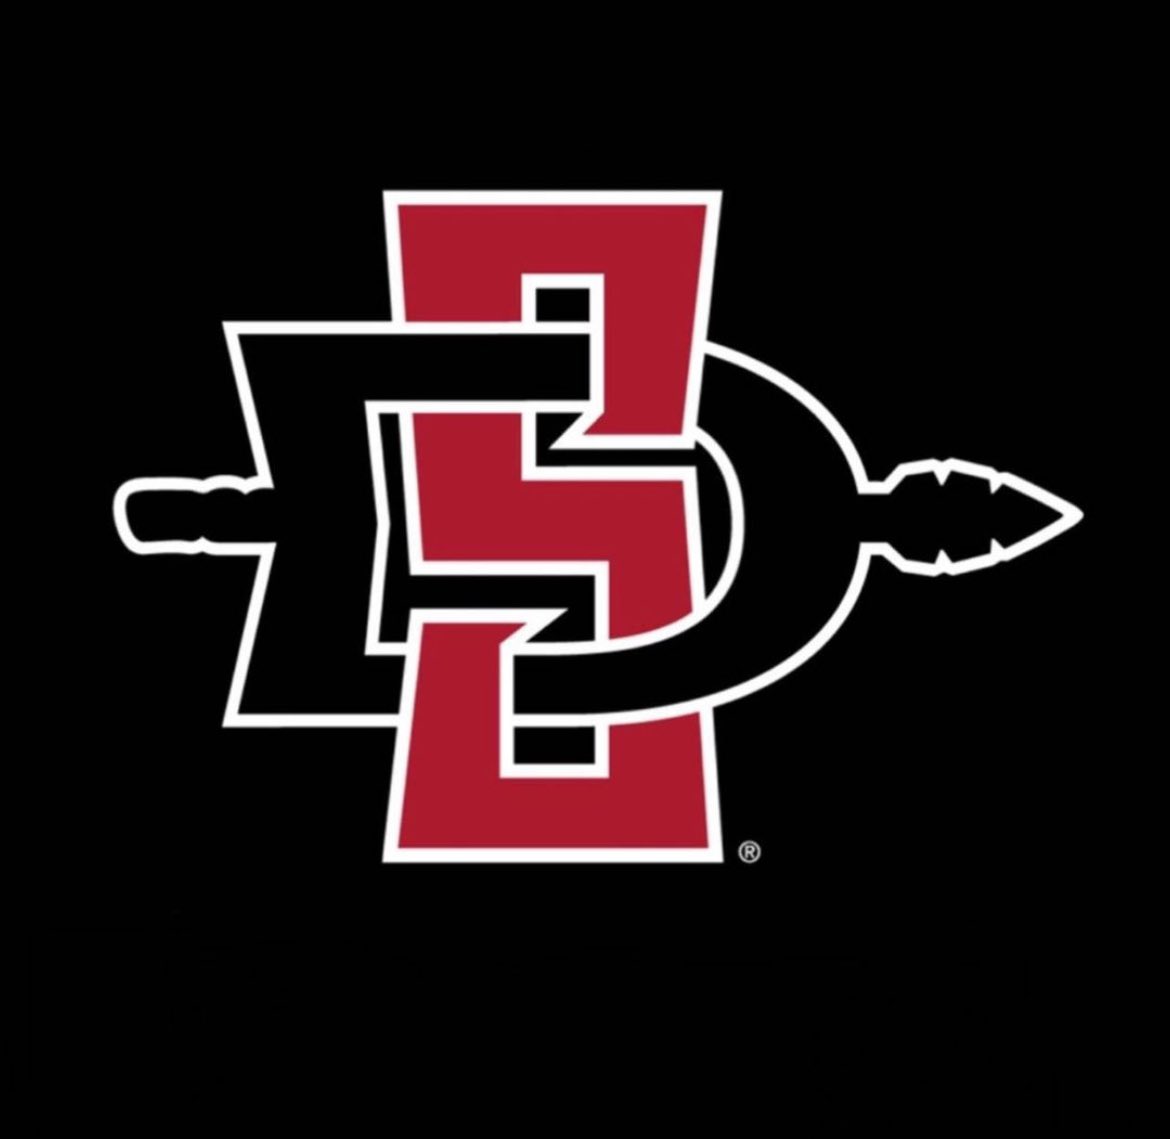 I will be back at San Diego state tomorrow #goaztecs  @AztecFB @DarianLH3 @TheHC_CoachLew 
@GregBiggins @ChadSimmons_ @BrandonHuffman @adamgorney @CoachTroop3 @coach_o_sports @coach_Miguel_